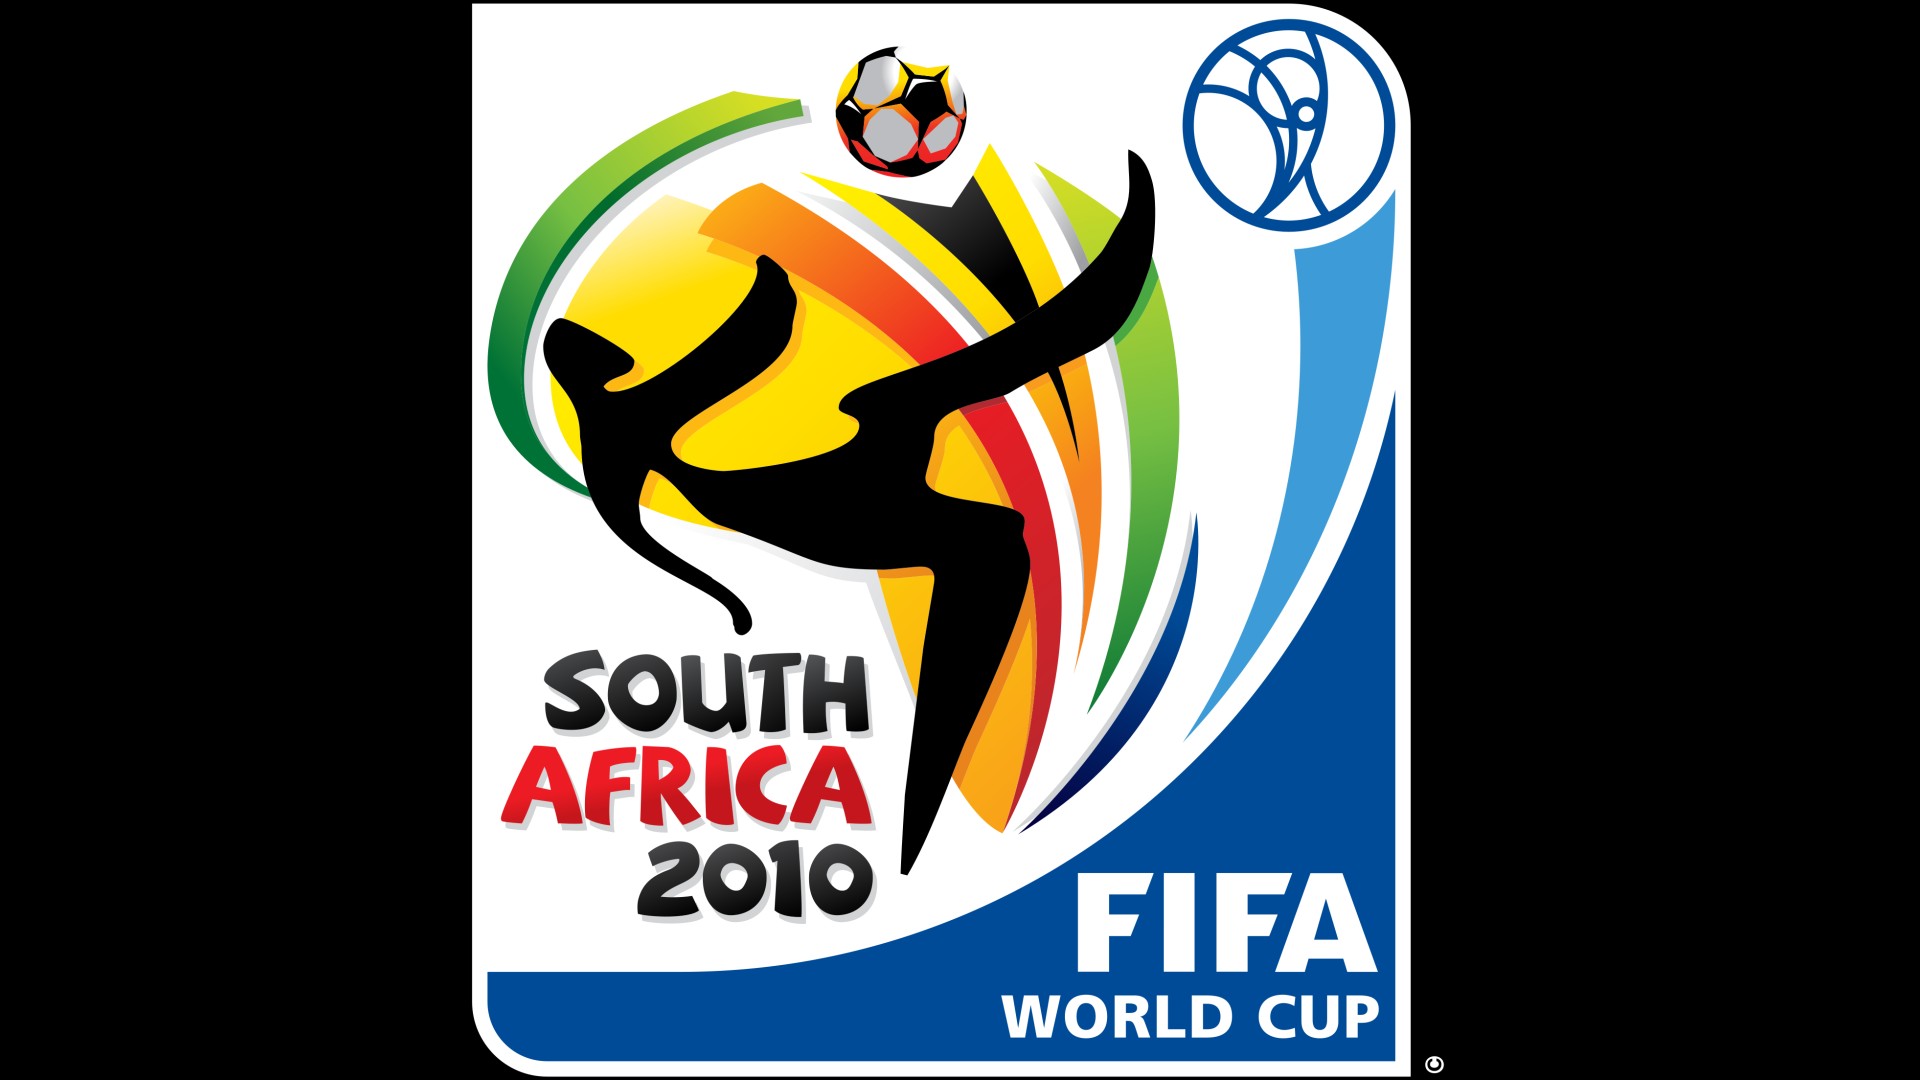 Video Game 2010 FiFA World Cup South Africa 1920x1080